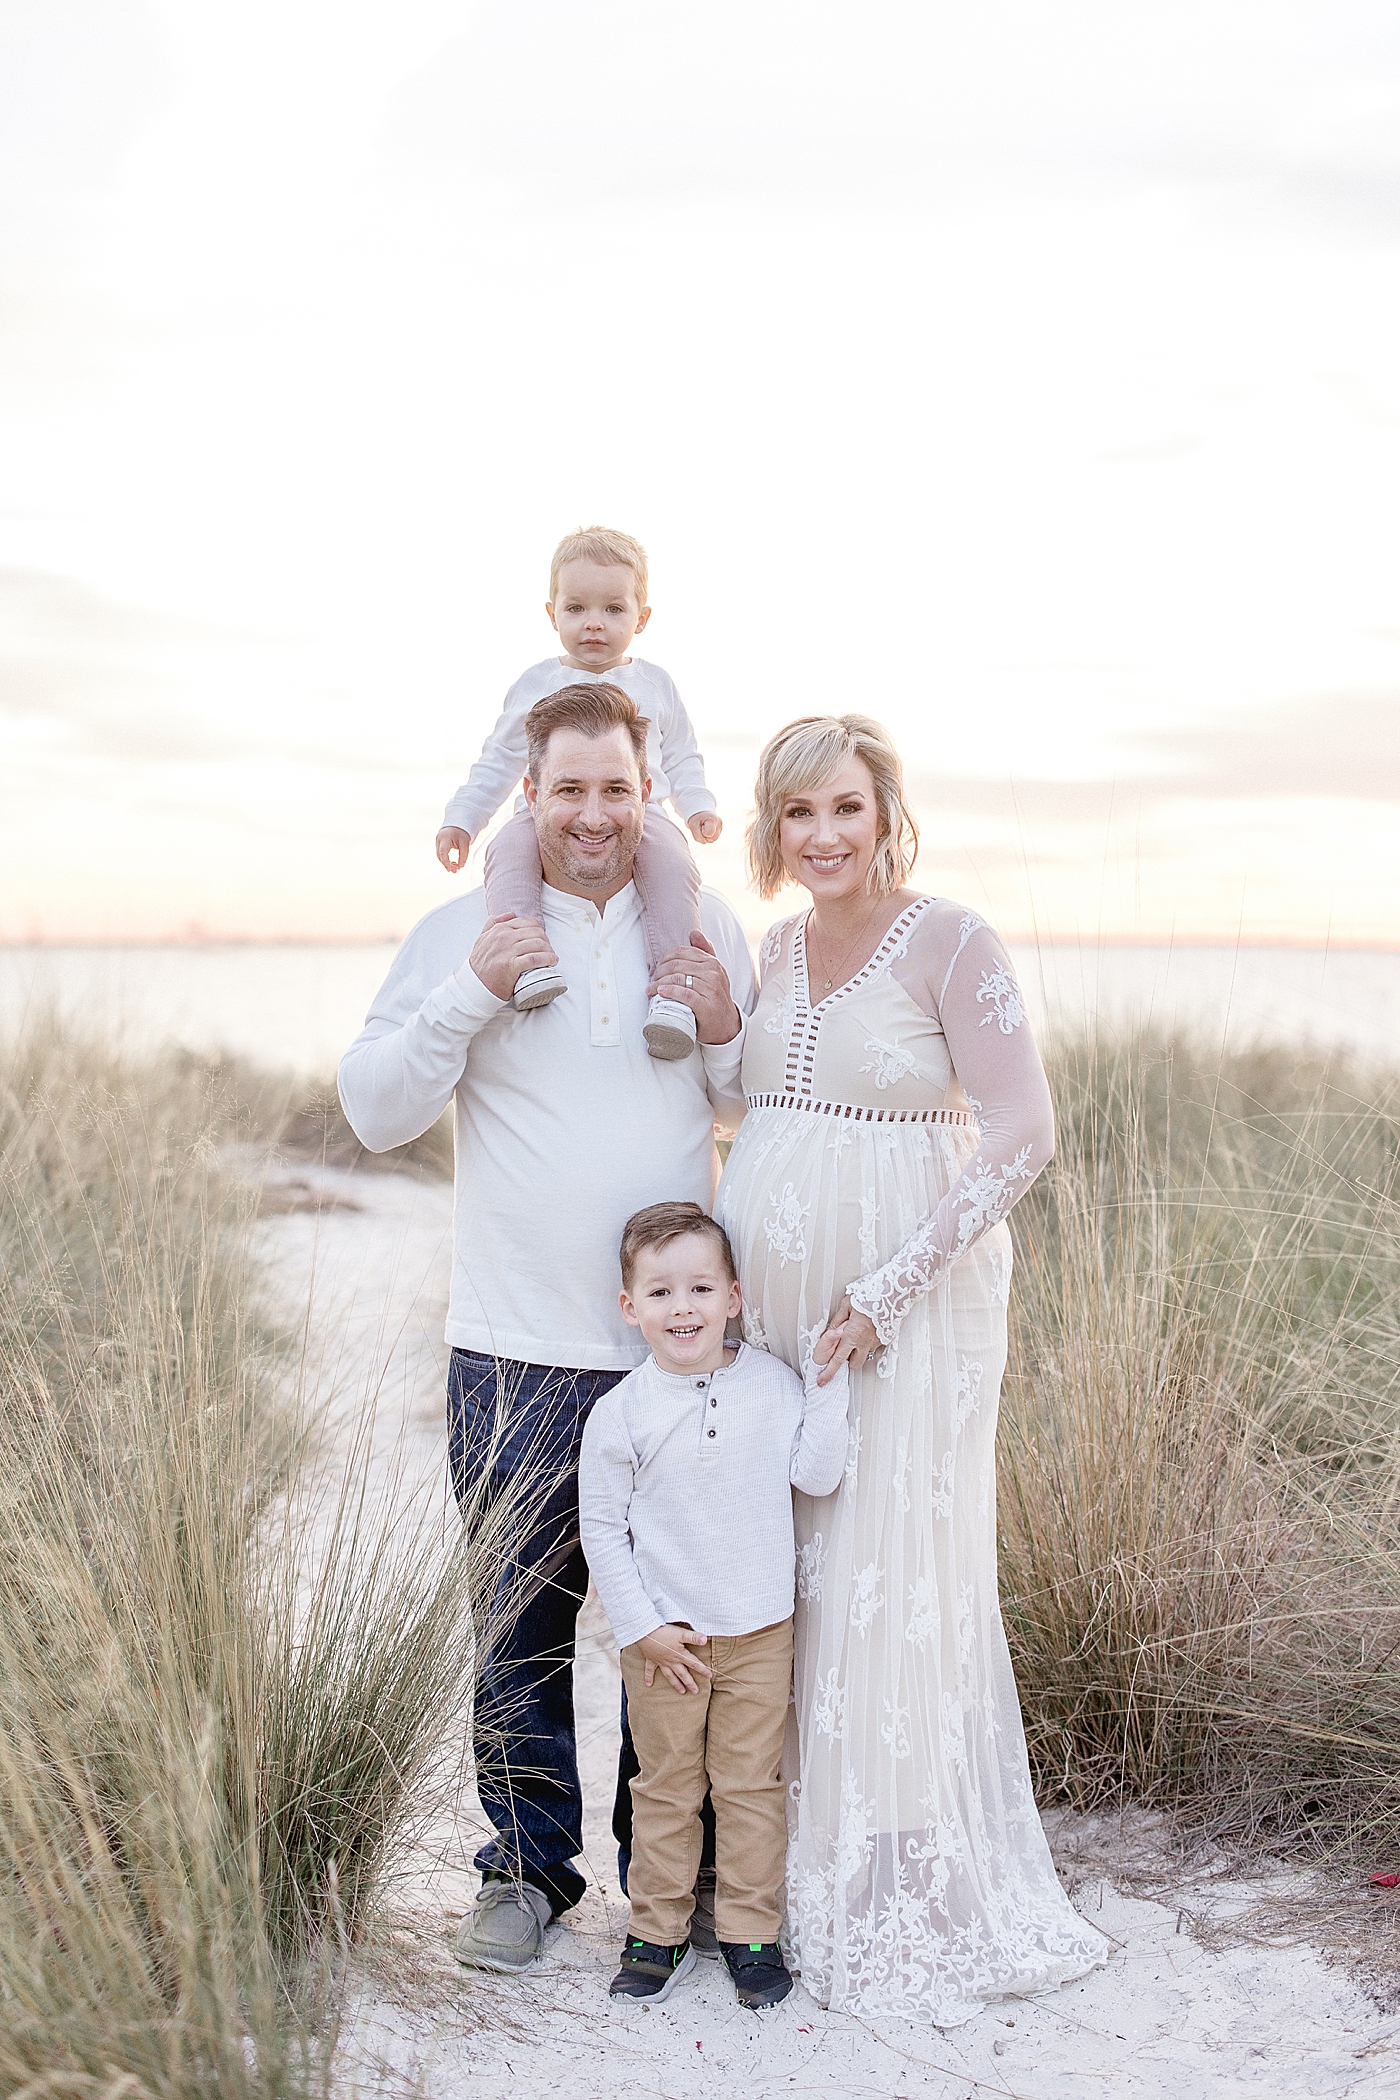 Sunset maternity session at Cypress Point Park with family of 4, soon to be 5! Photo by Brittany Elise Photography.